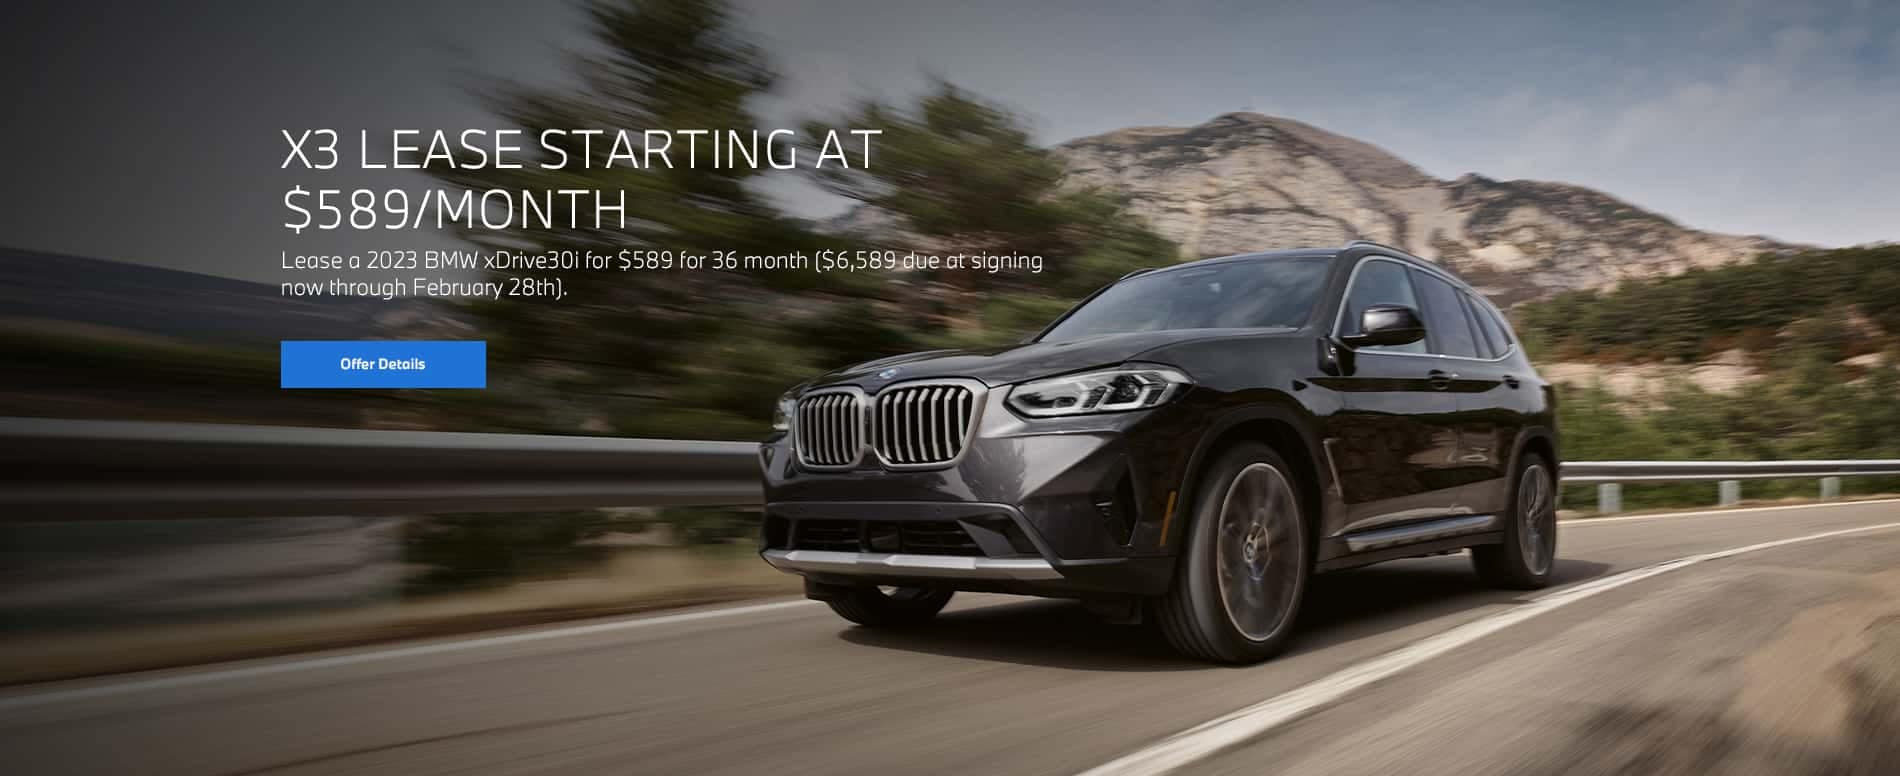 2023 X3 lease starting at $589 per month for 36 months